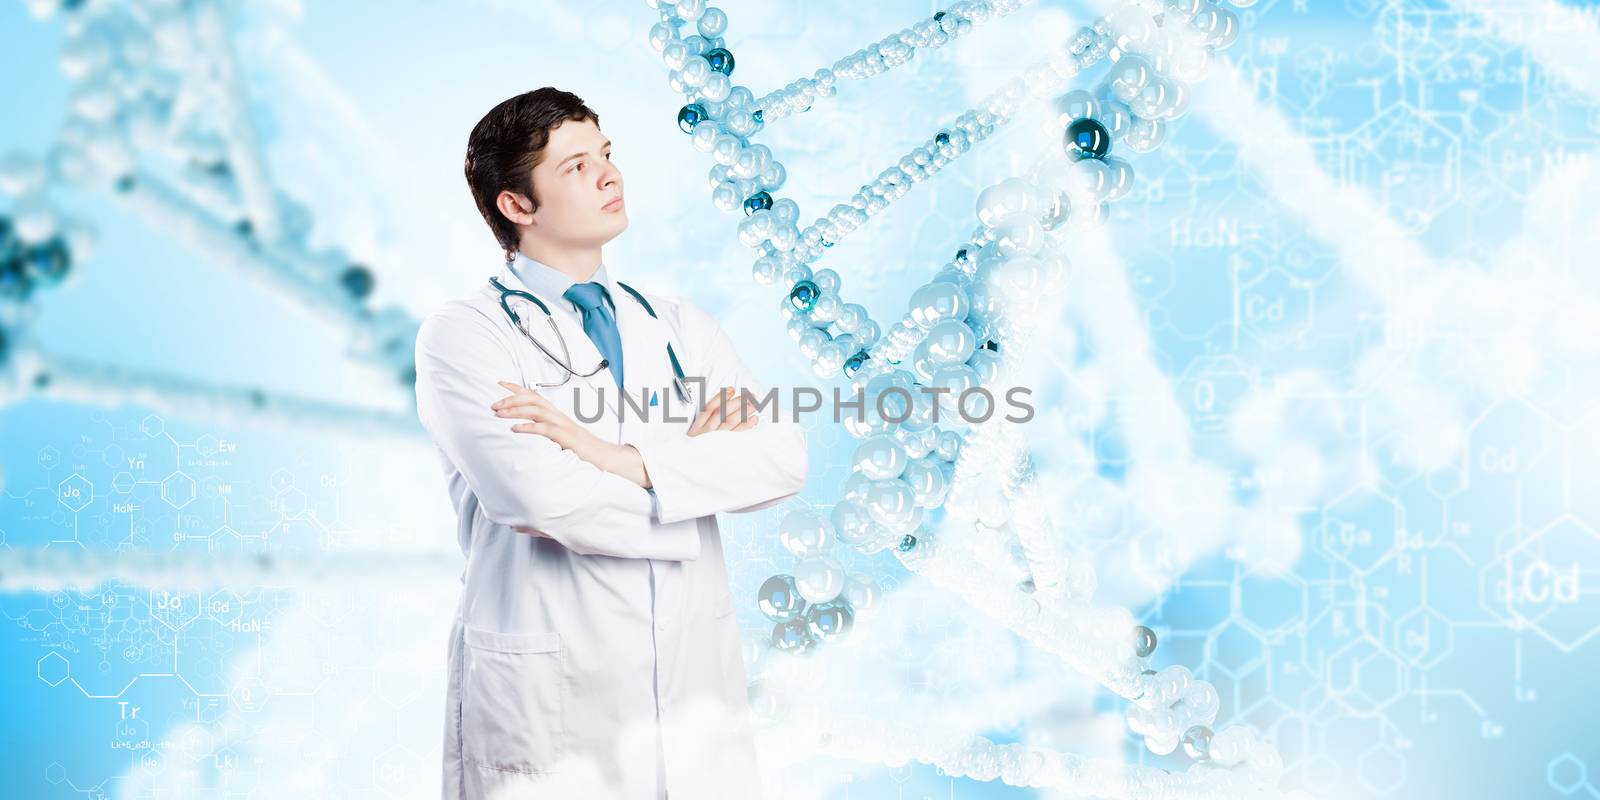 Image of happy confident doctor in uniform against blue background